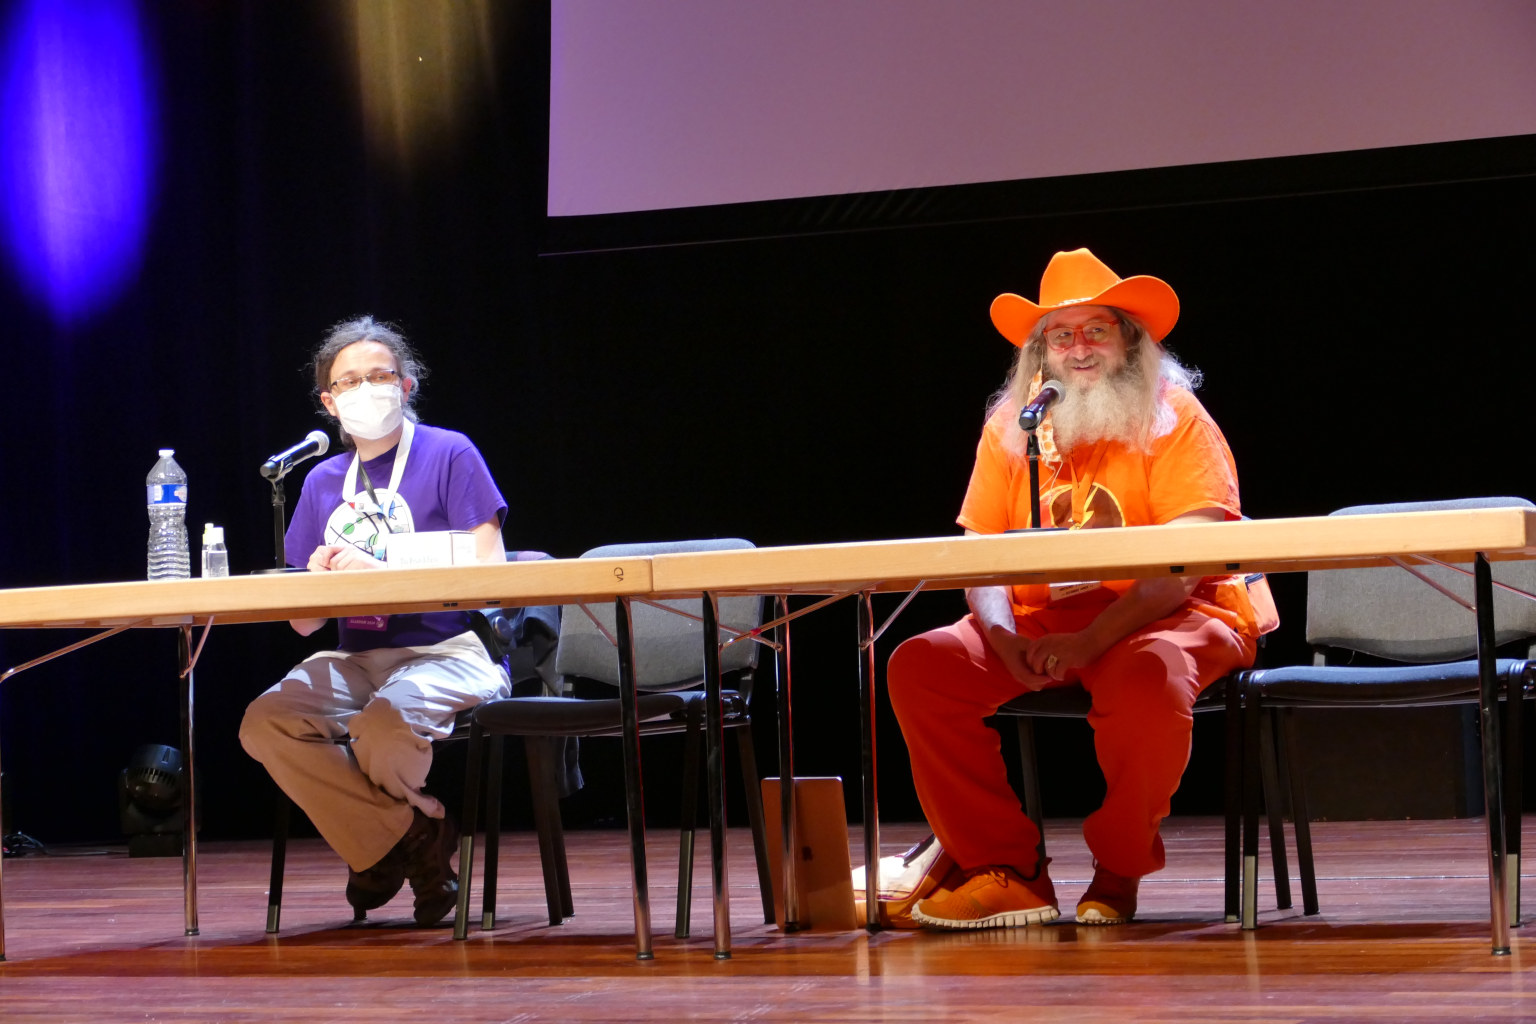 Two man sitting behind the tables. One wears mask. Second one is dressed fully in orange.